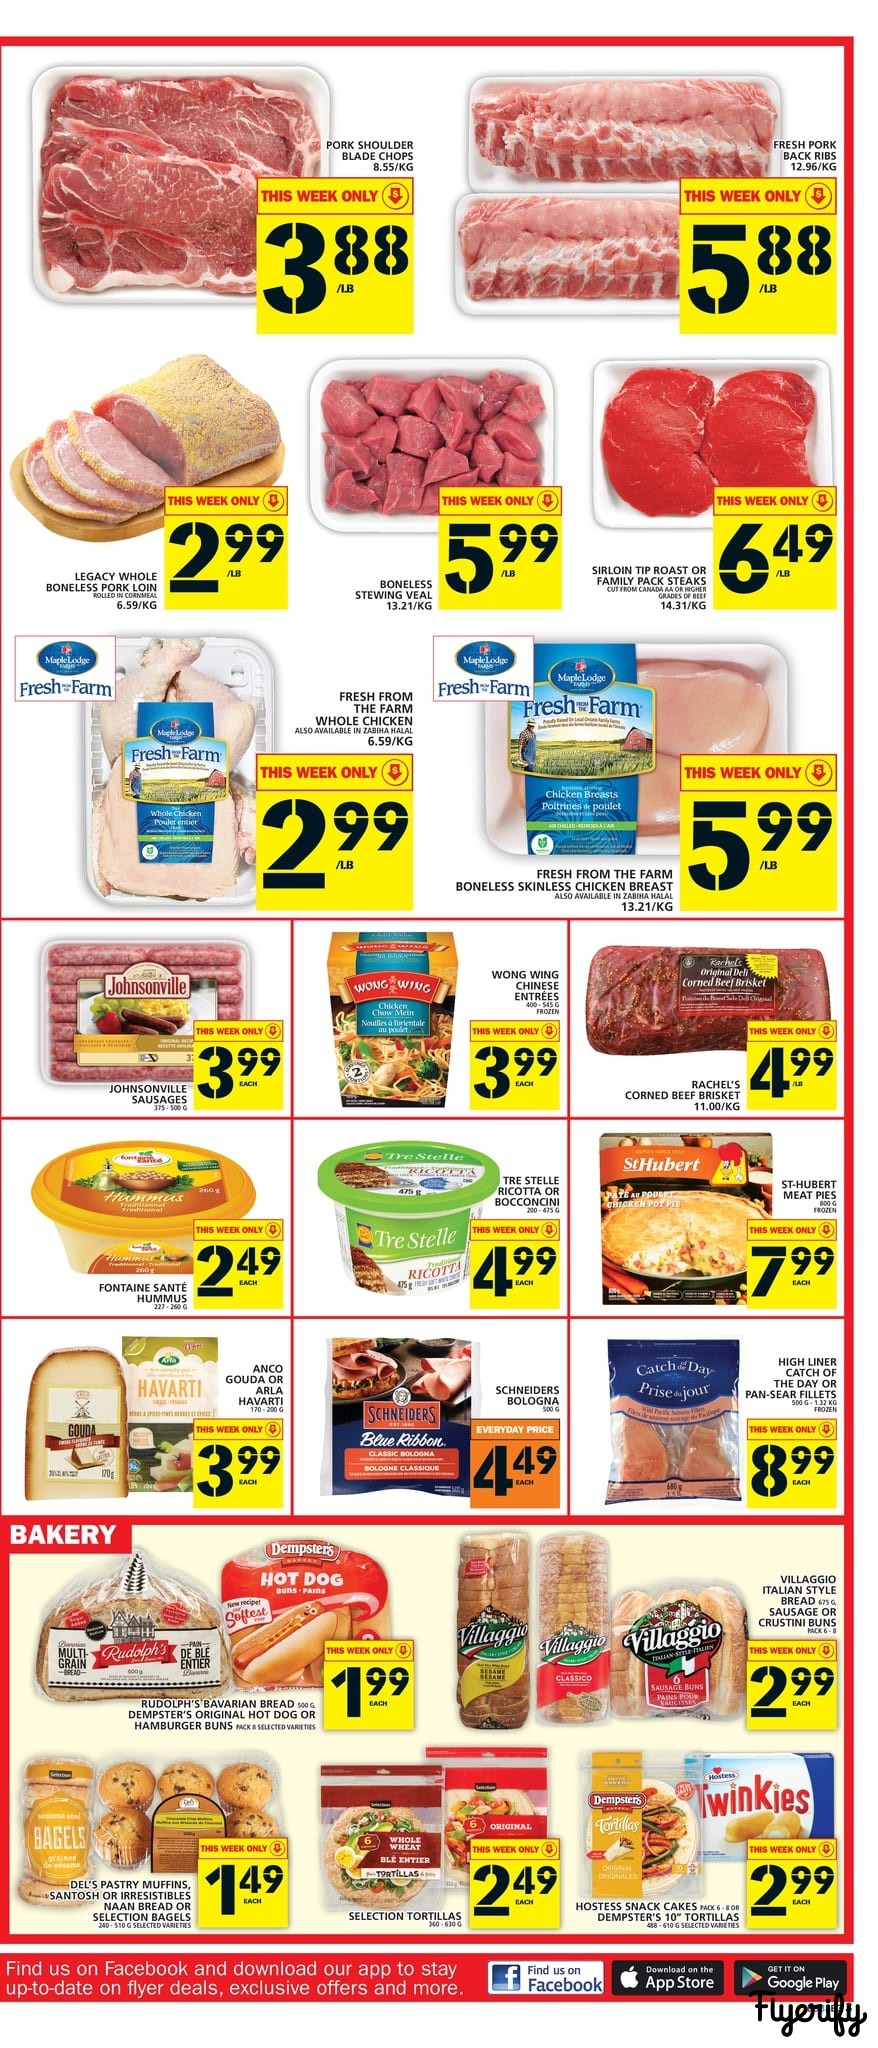 Food Basics (Kitchener, London, Rest of ON) Flyer January 24 to 30 Canada